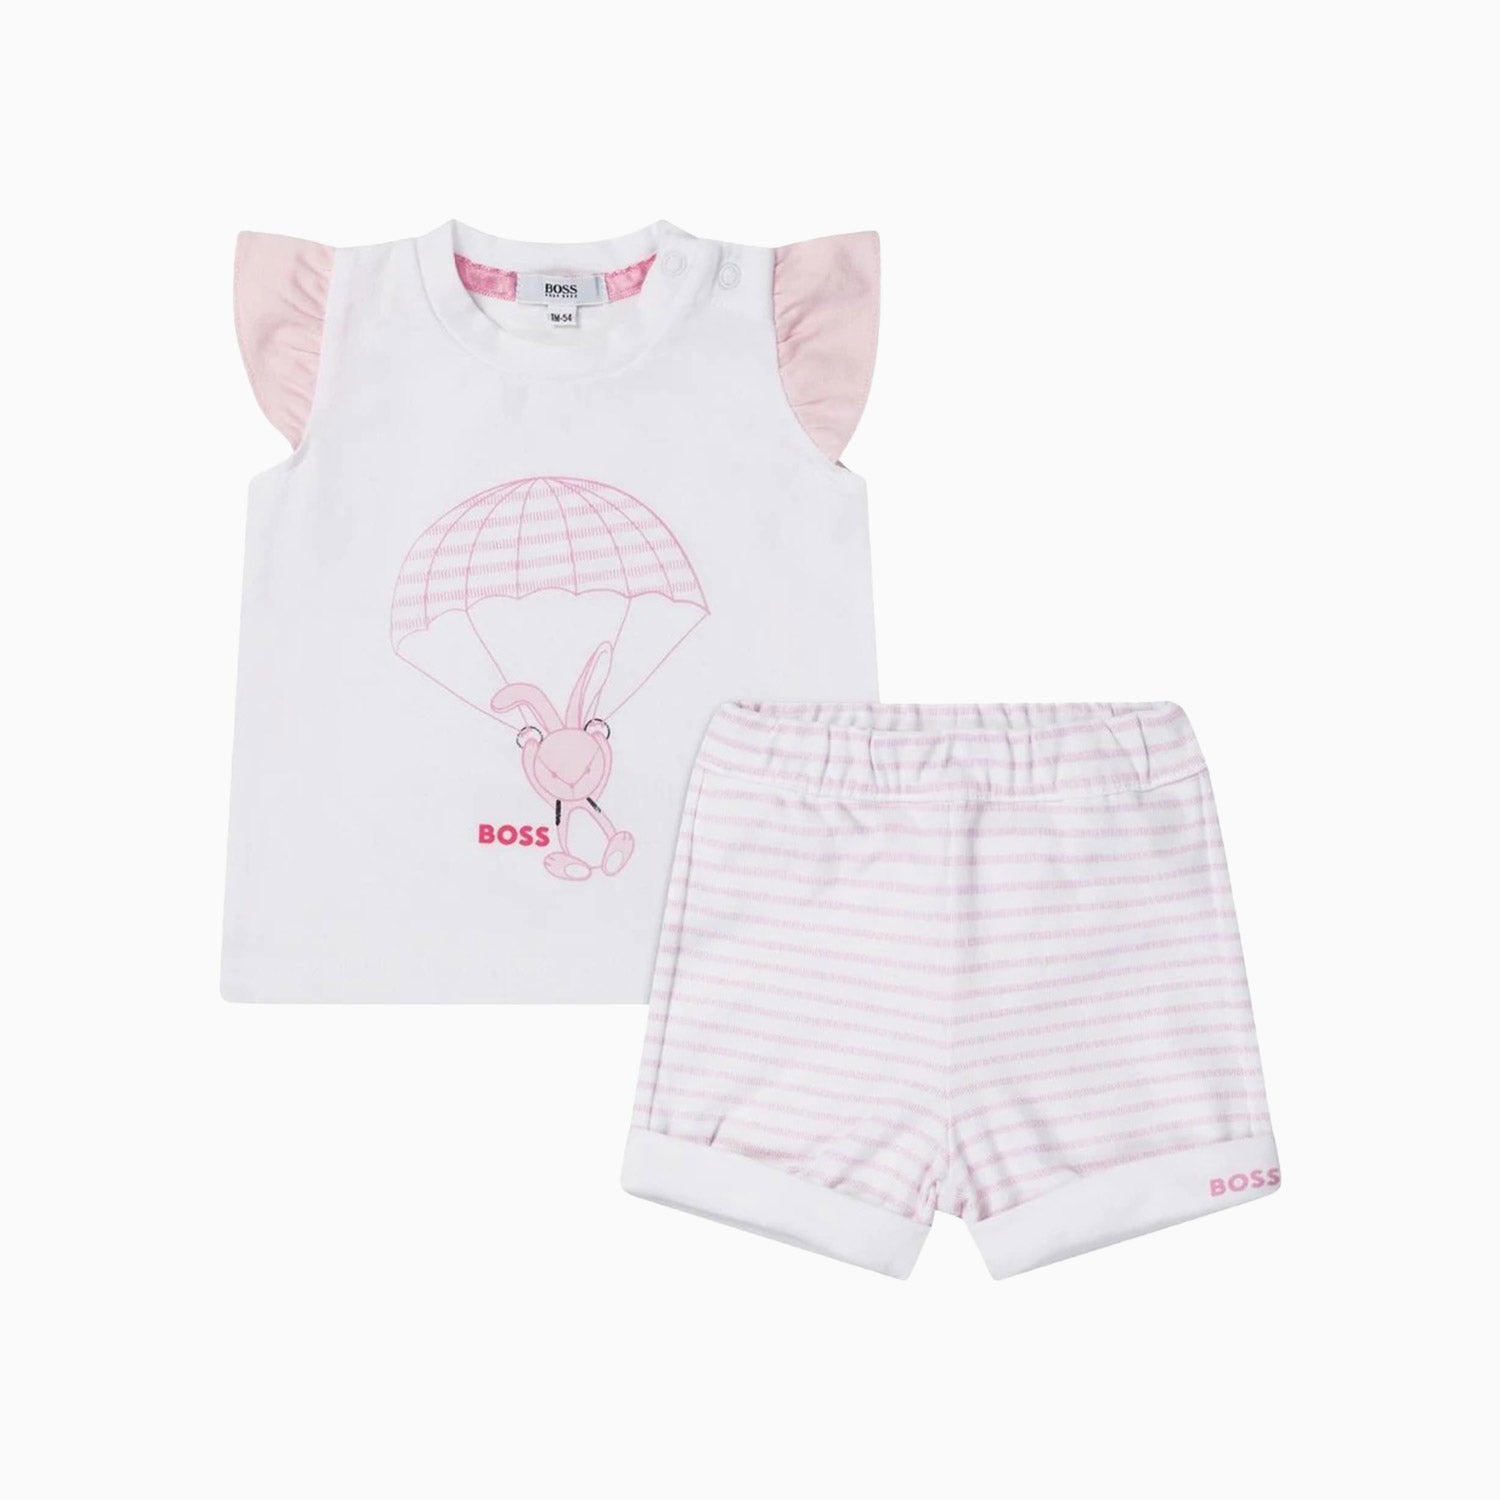 hugo-boss-kids-t-shirt-and-shorts-outfit-toddlers-j98347-10b